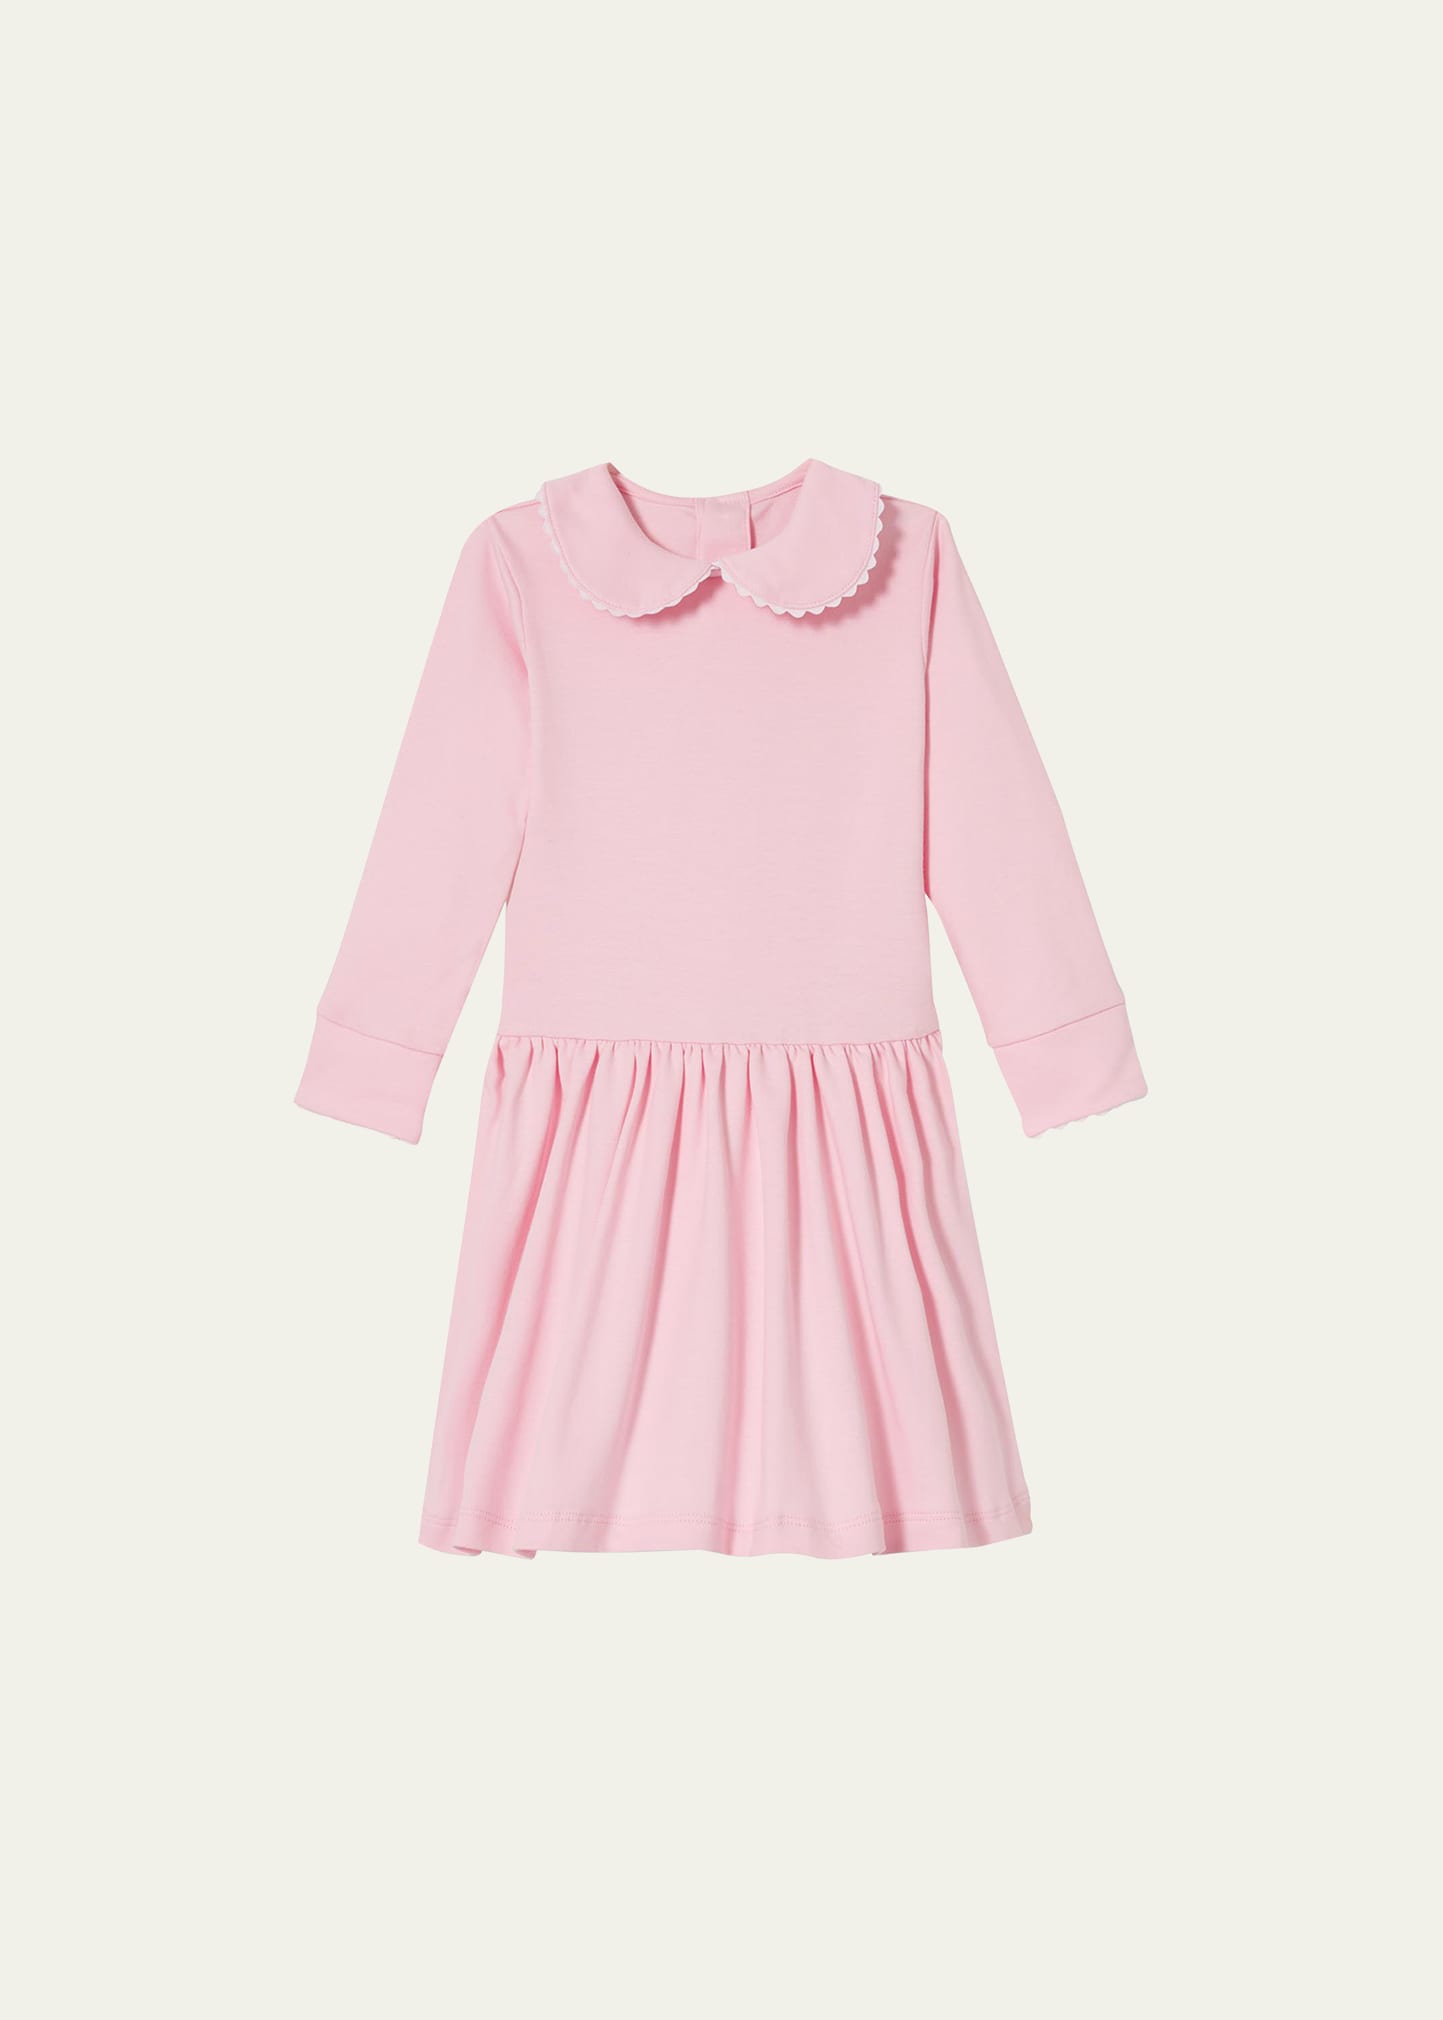 Shop Classic Prep Childrenswear Girl's Claudette Peter Pan Collar Fit & Flare Dress In Pink